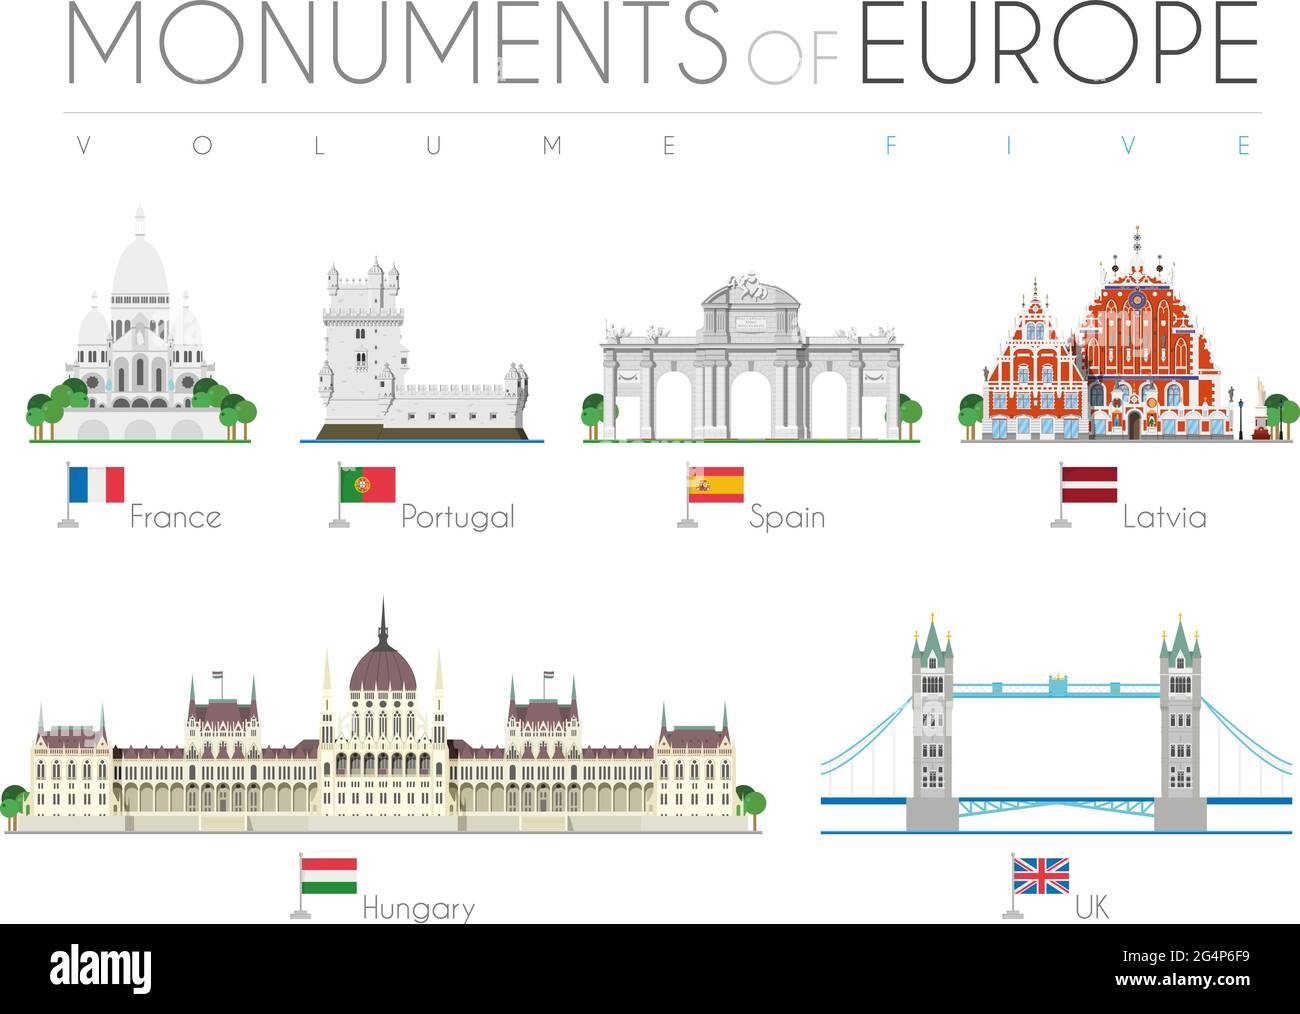 Monuments of Europe in cartoon style Volume 5: Sacre Coeur (France), Belem Tower (Portugal), Alcala Gate (Spain), Blackheads House (Latvia), Hungarian Stock Vector